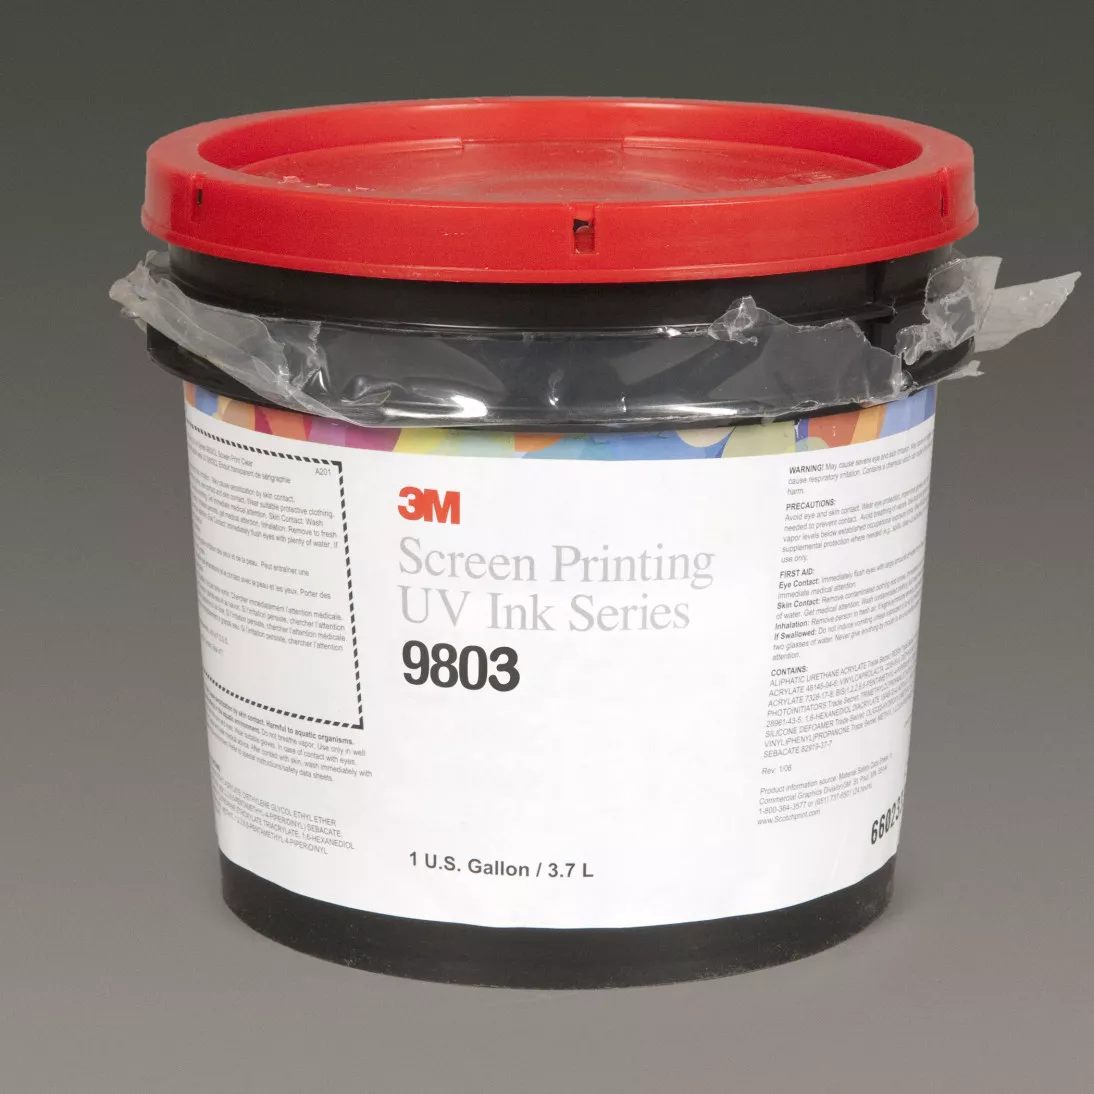 3M™ Screen Printing UV Ink 9803, Mixing Black Screen Print Ink, 1 Gallon
Container